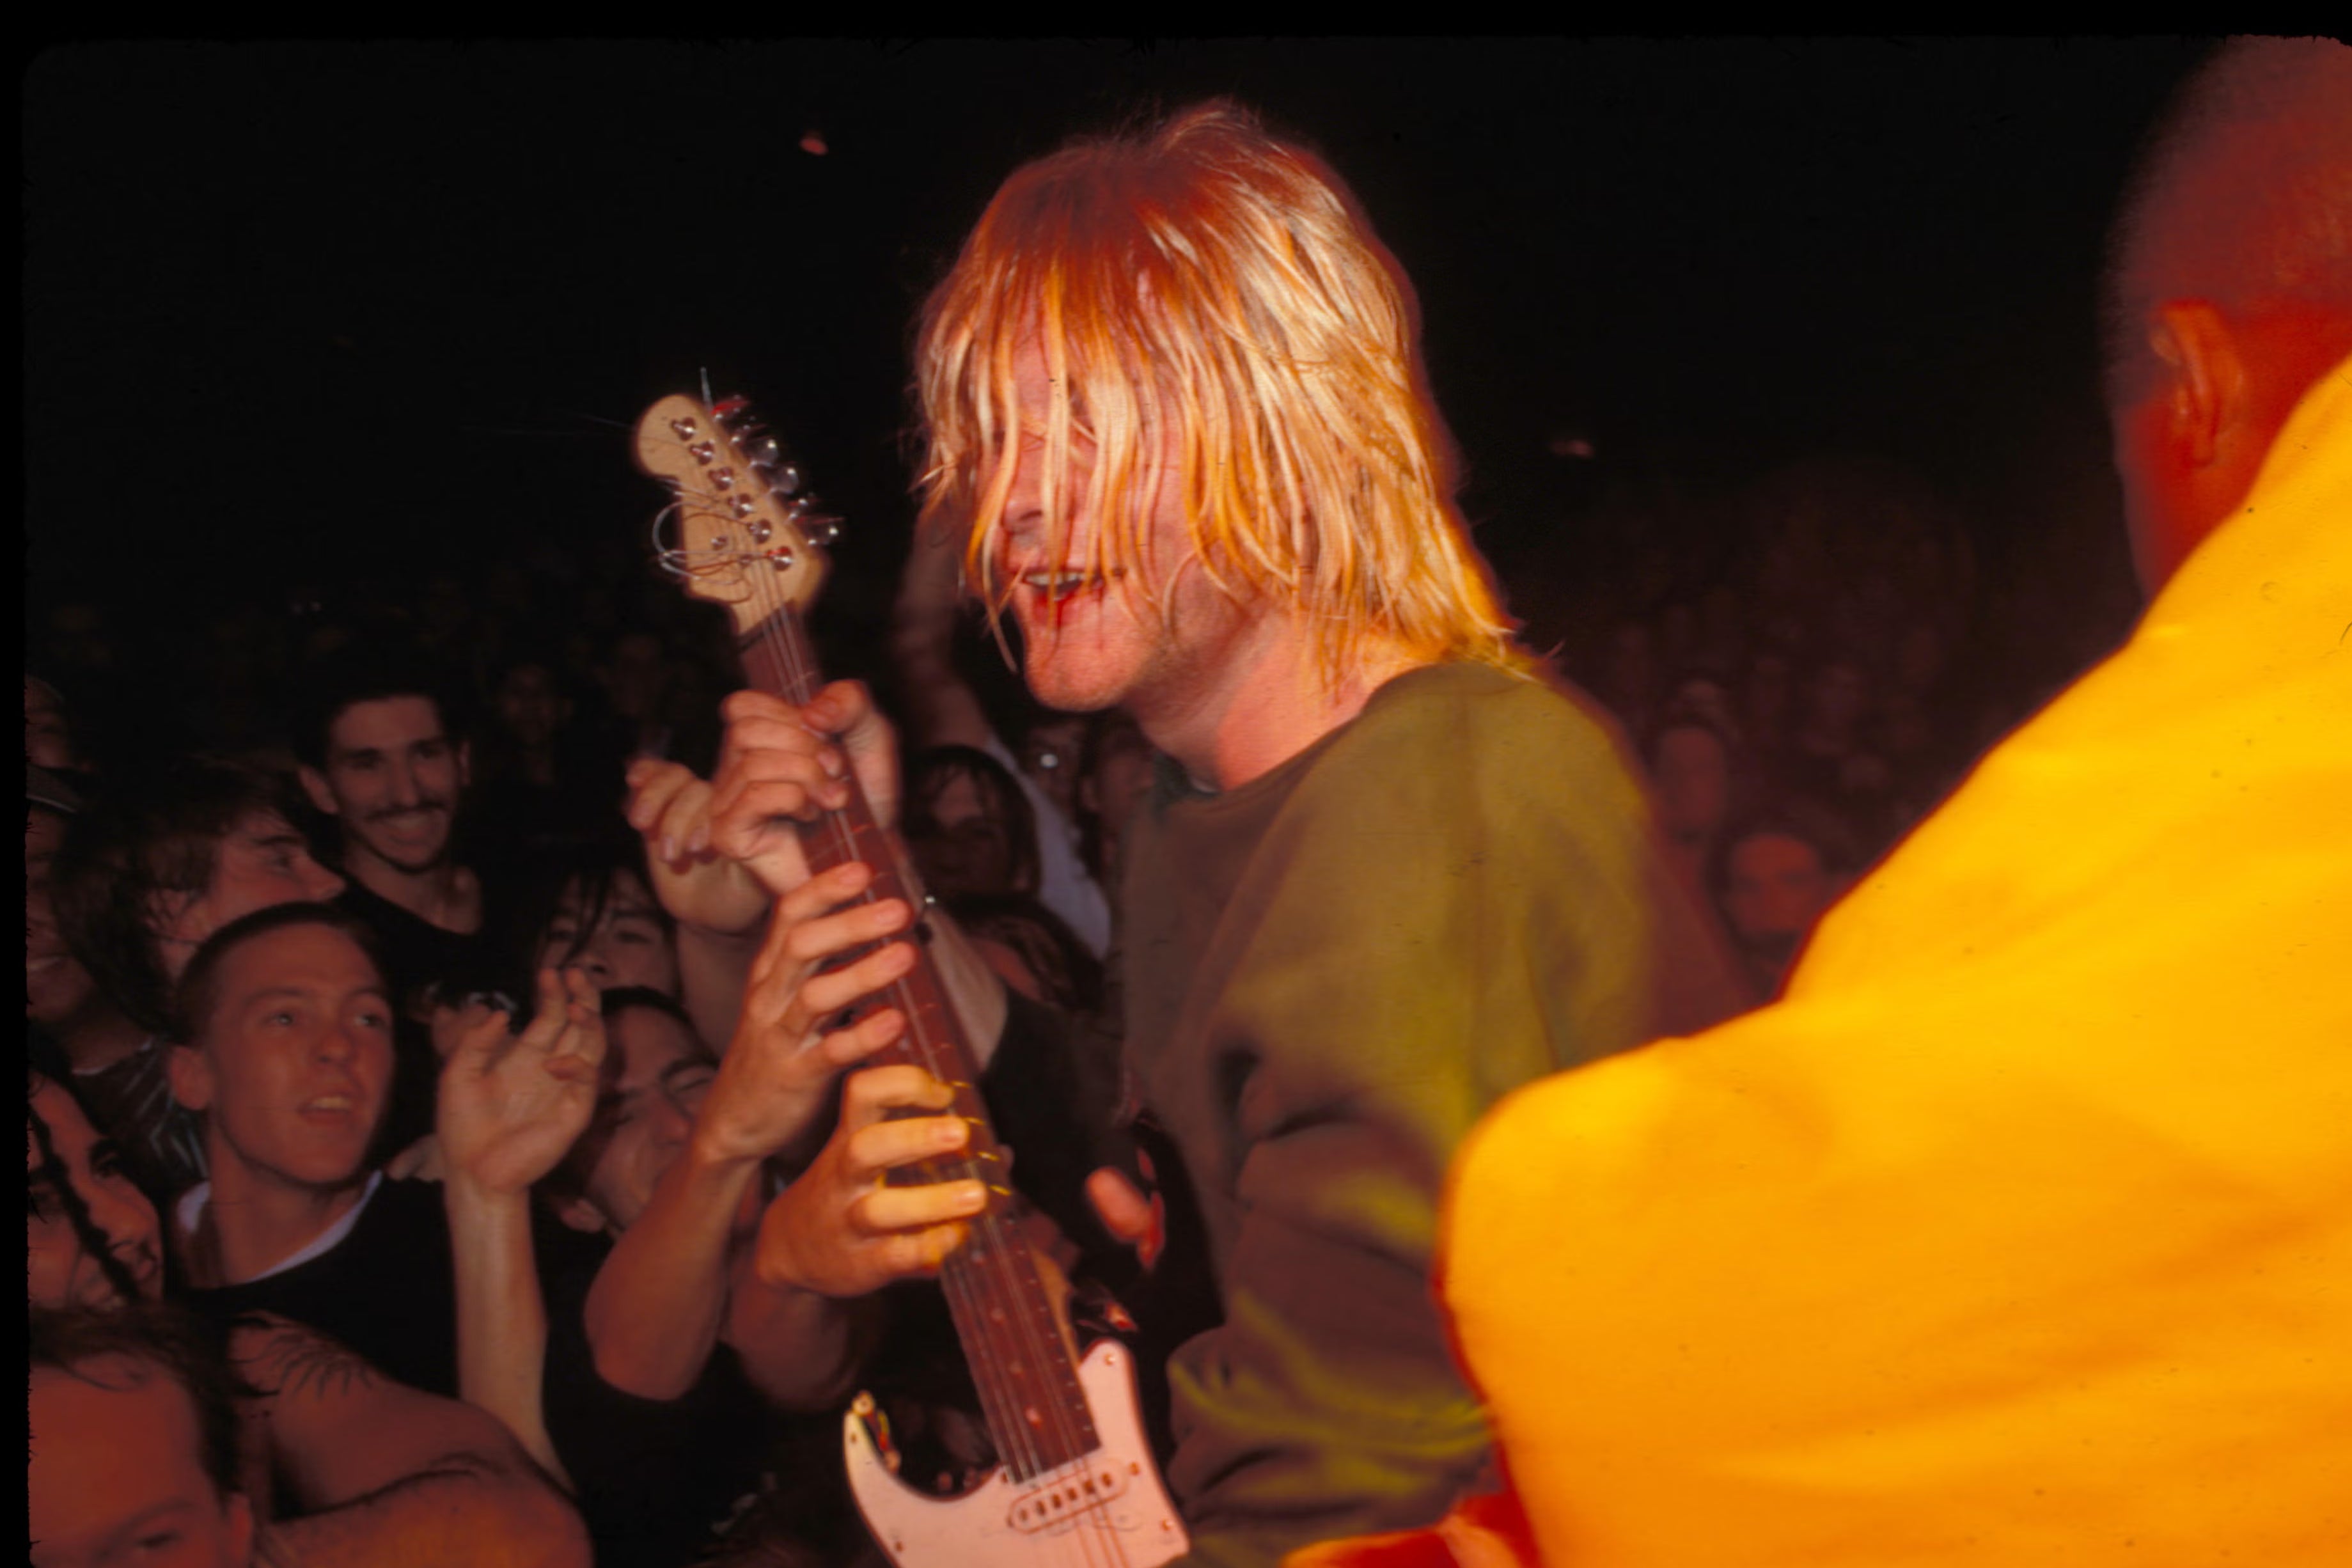 Those early Nirvana shows were experienced by fans as deeply communal and endlessly relatable